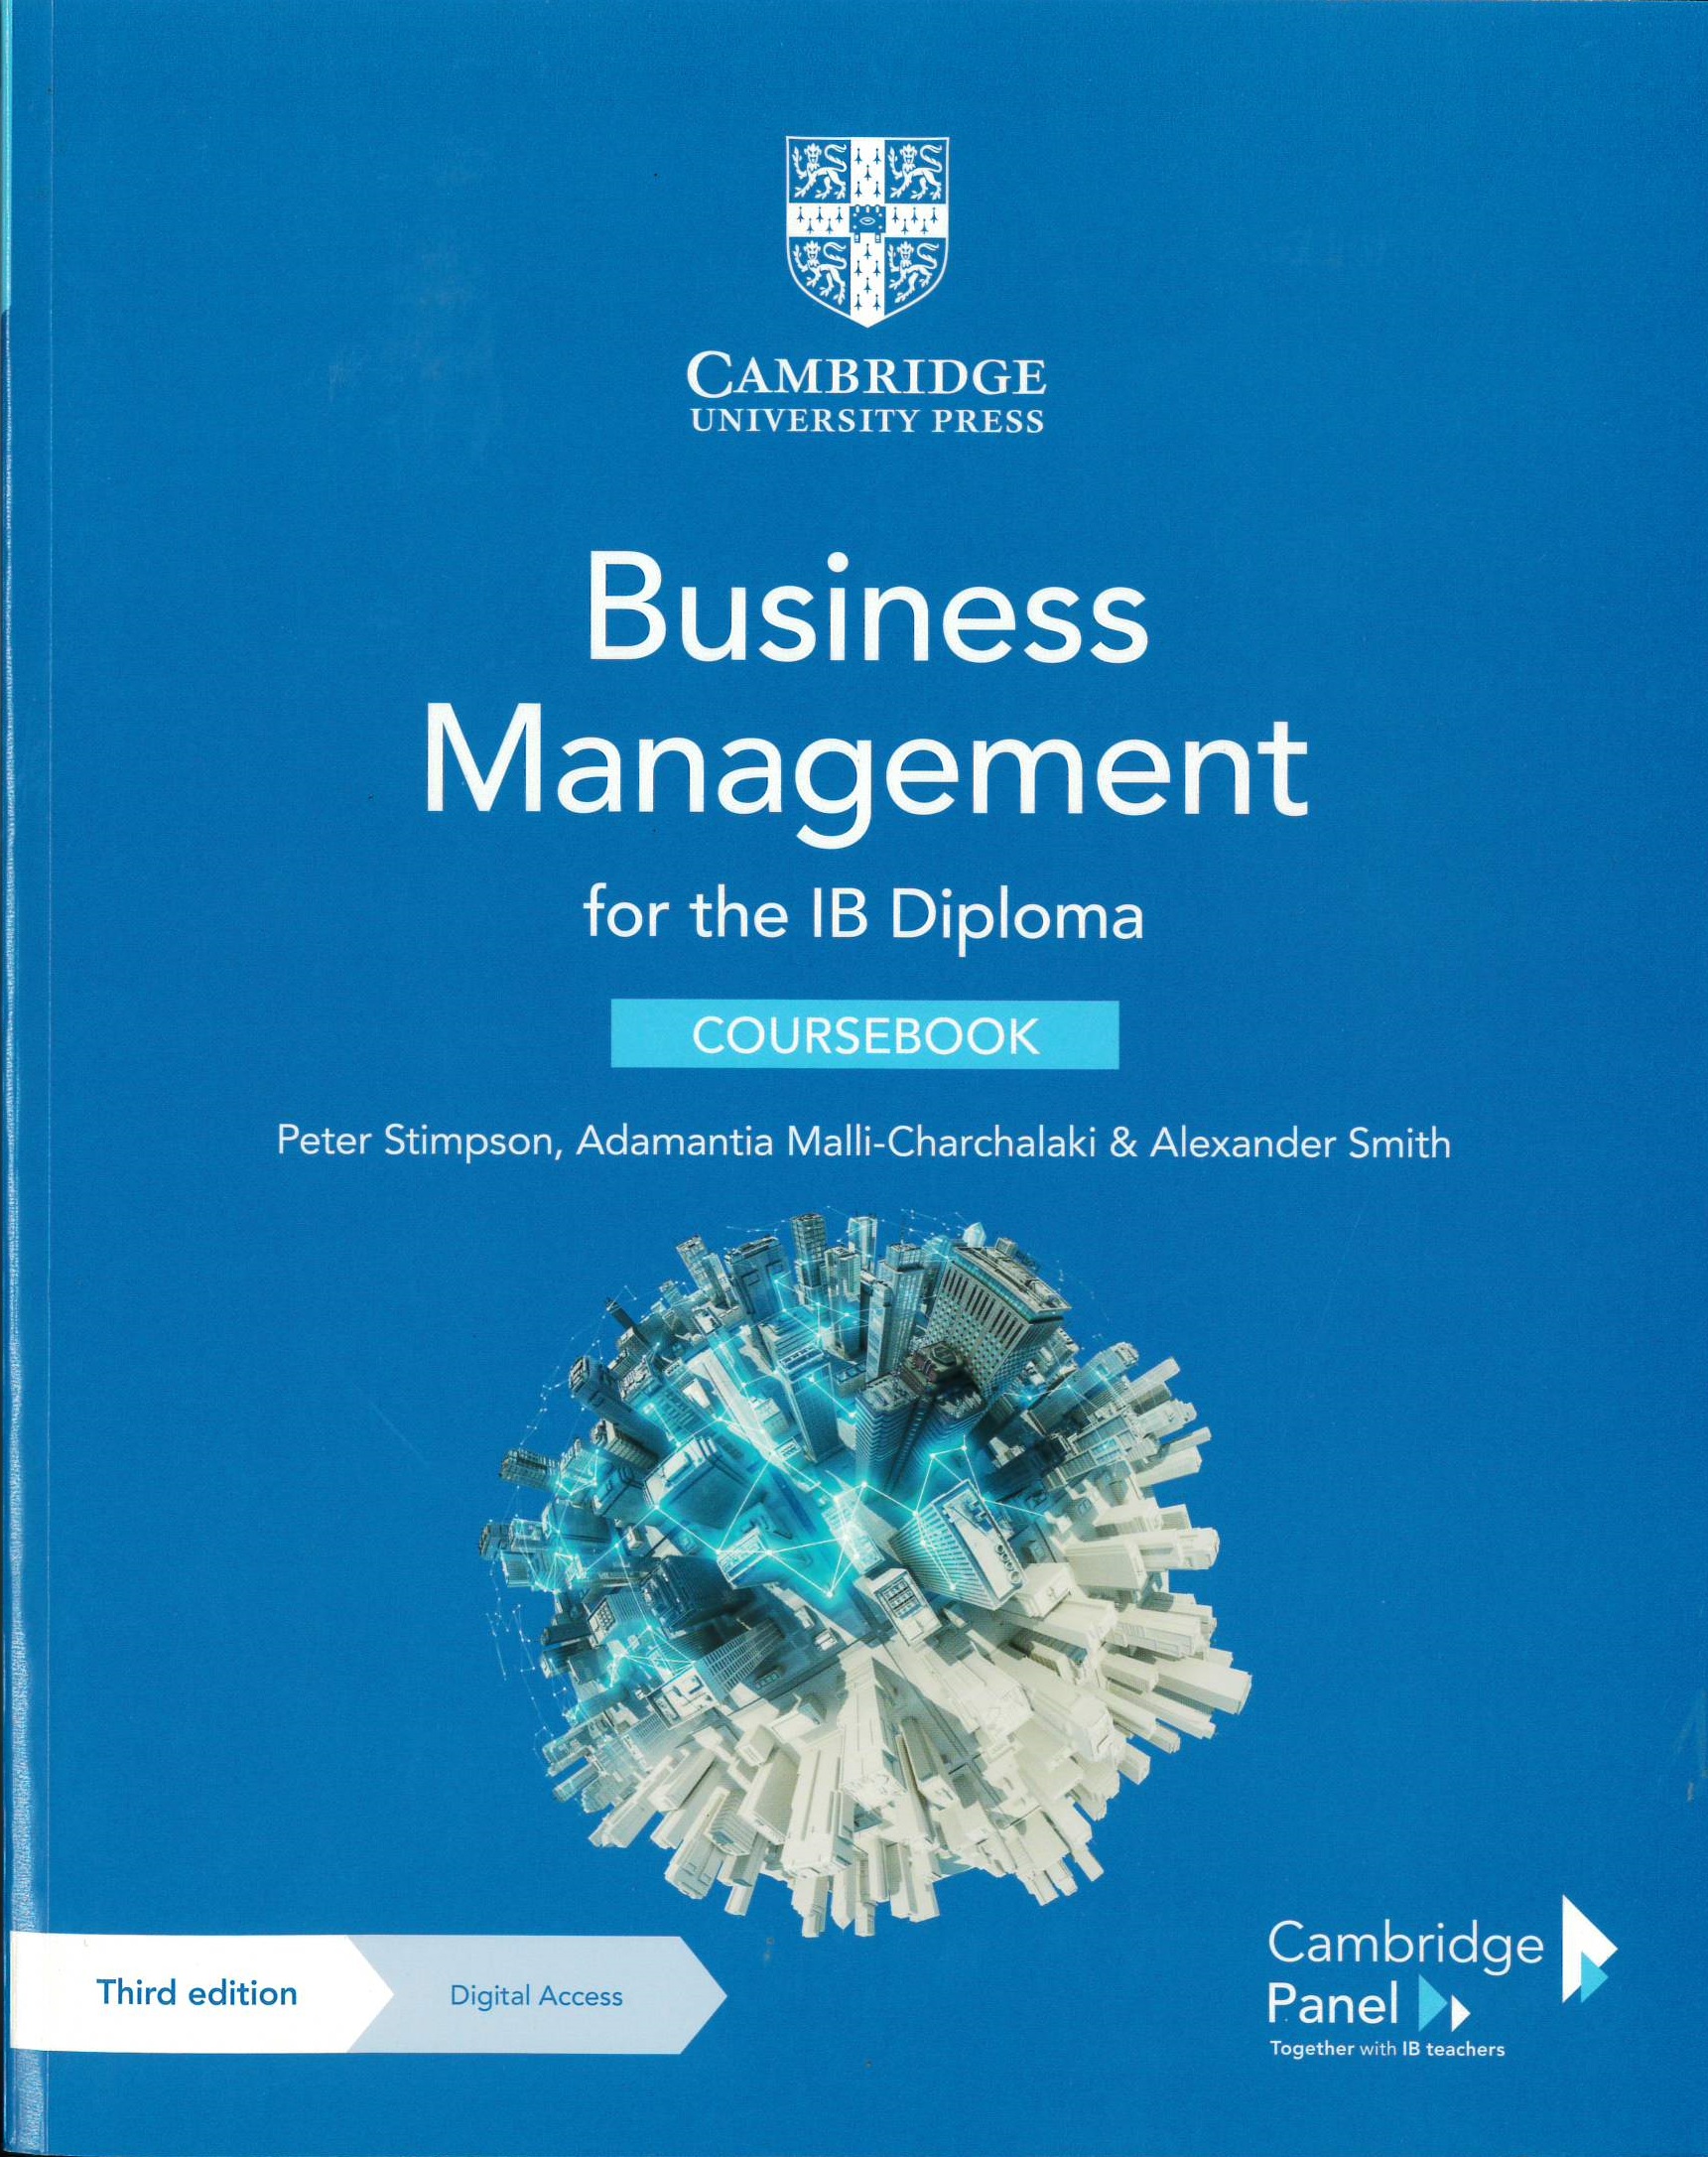 Business management for the IB diploma. Coursebook